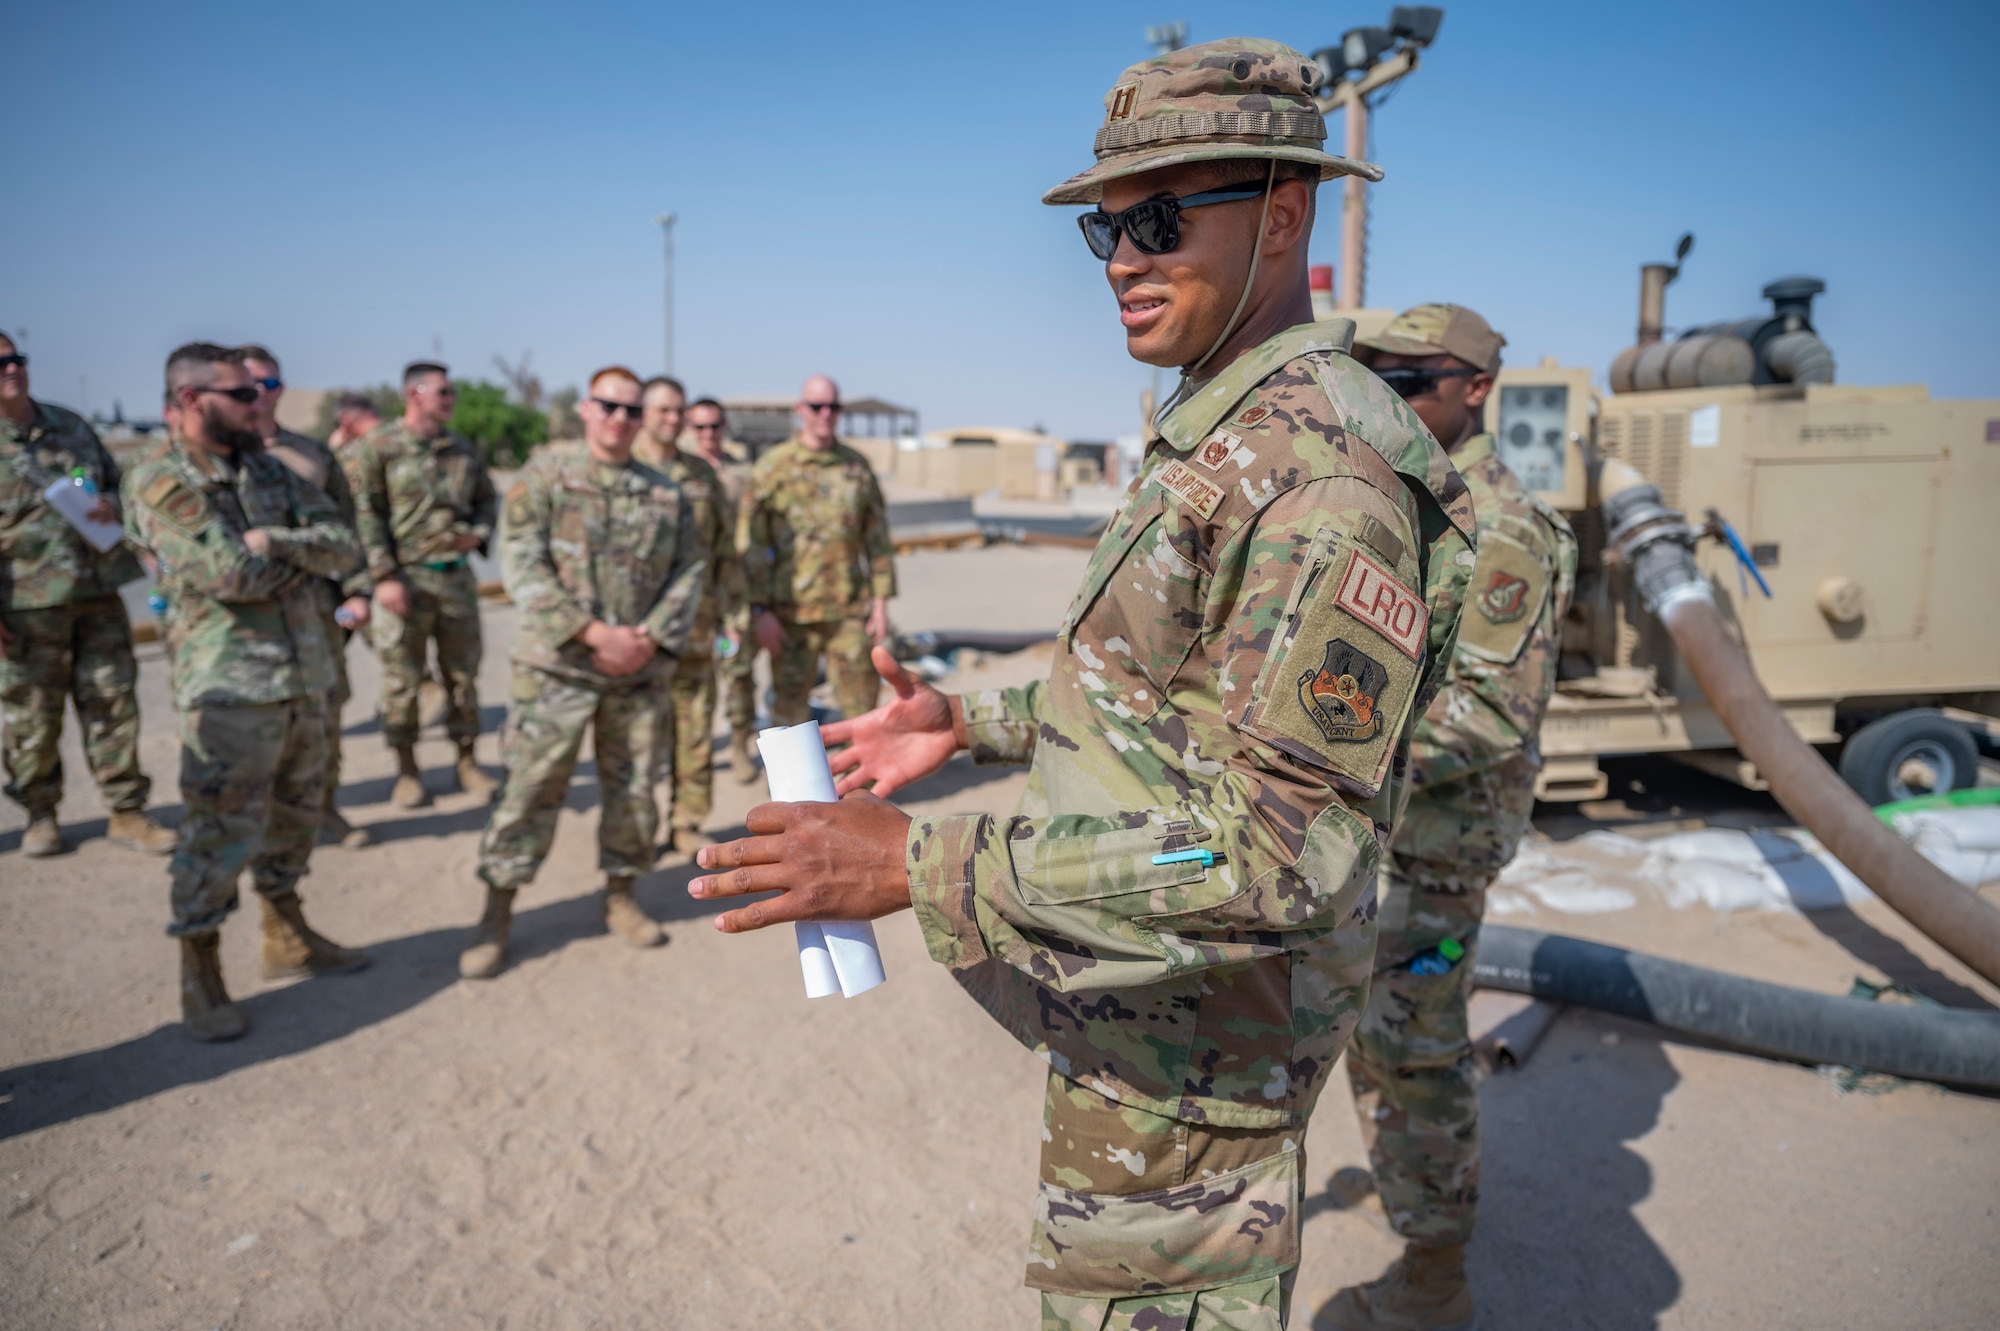 U.S. Air Force Capt. Andrew McGee, vehicle management and petroleum, oil and lubricants flight commander assigned to the 386th Expeditionary Logistics Readiness Squadron, discusses fuel operations with Airmen at Ali Al Salem Air Base, Kuwait, on Oct. 15, 2021.